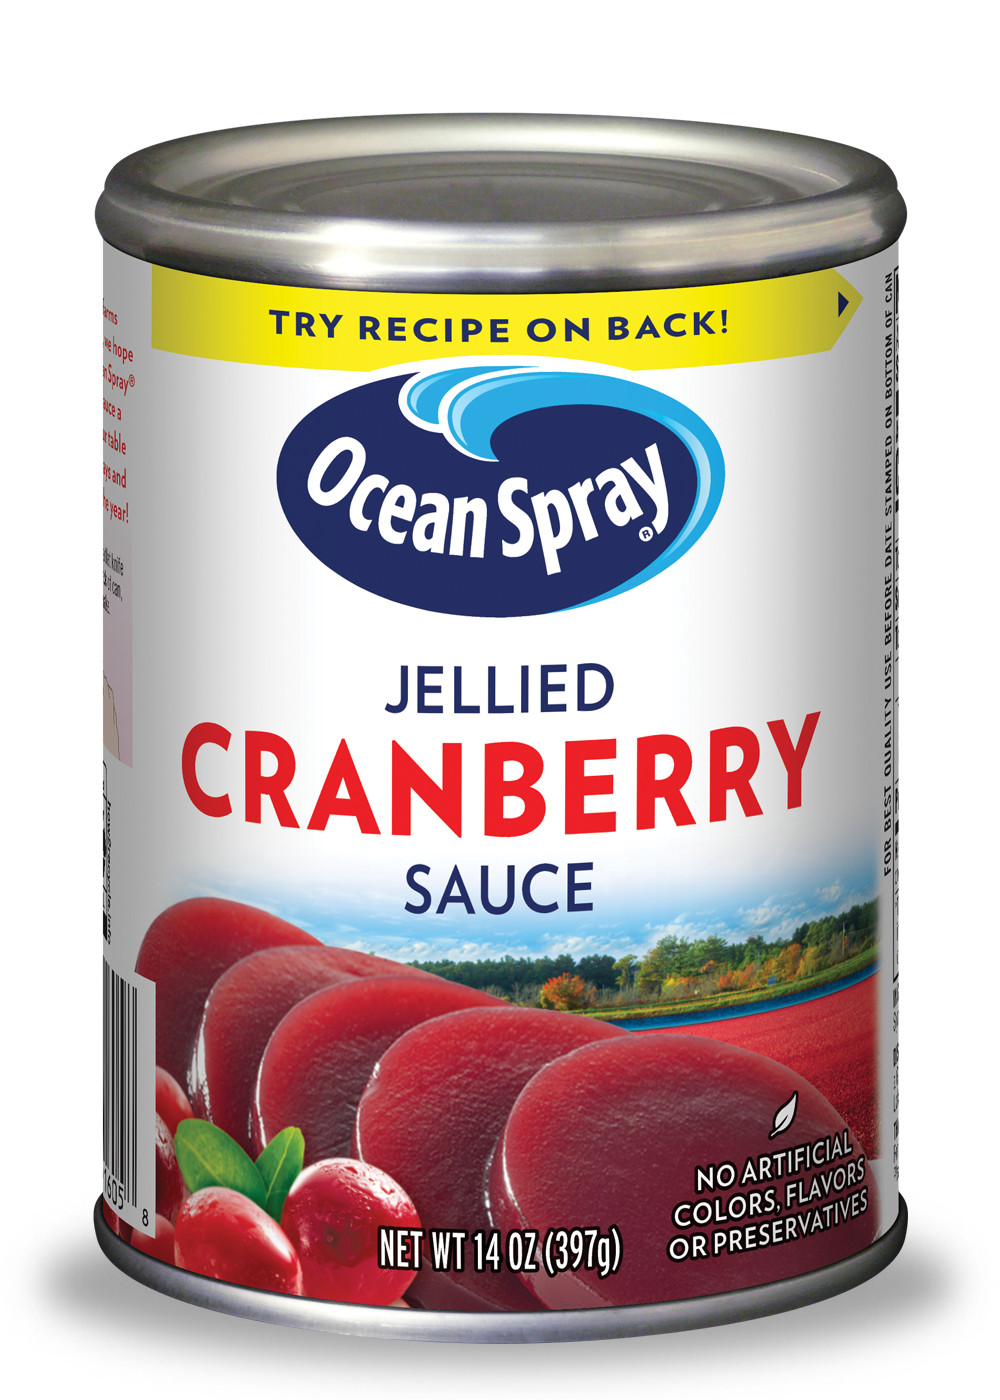 Sốt Nam Việt Quốc Dạng Thạch Ocean Spray Jellied Cranberry Sauce, Hộp 397g